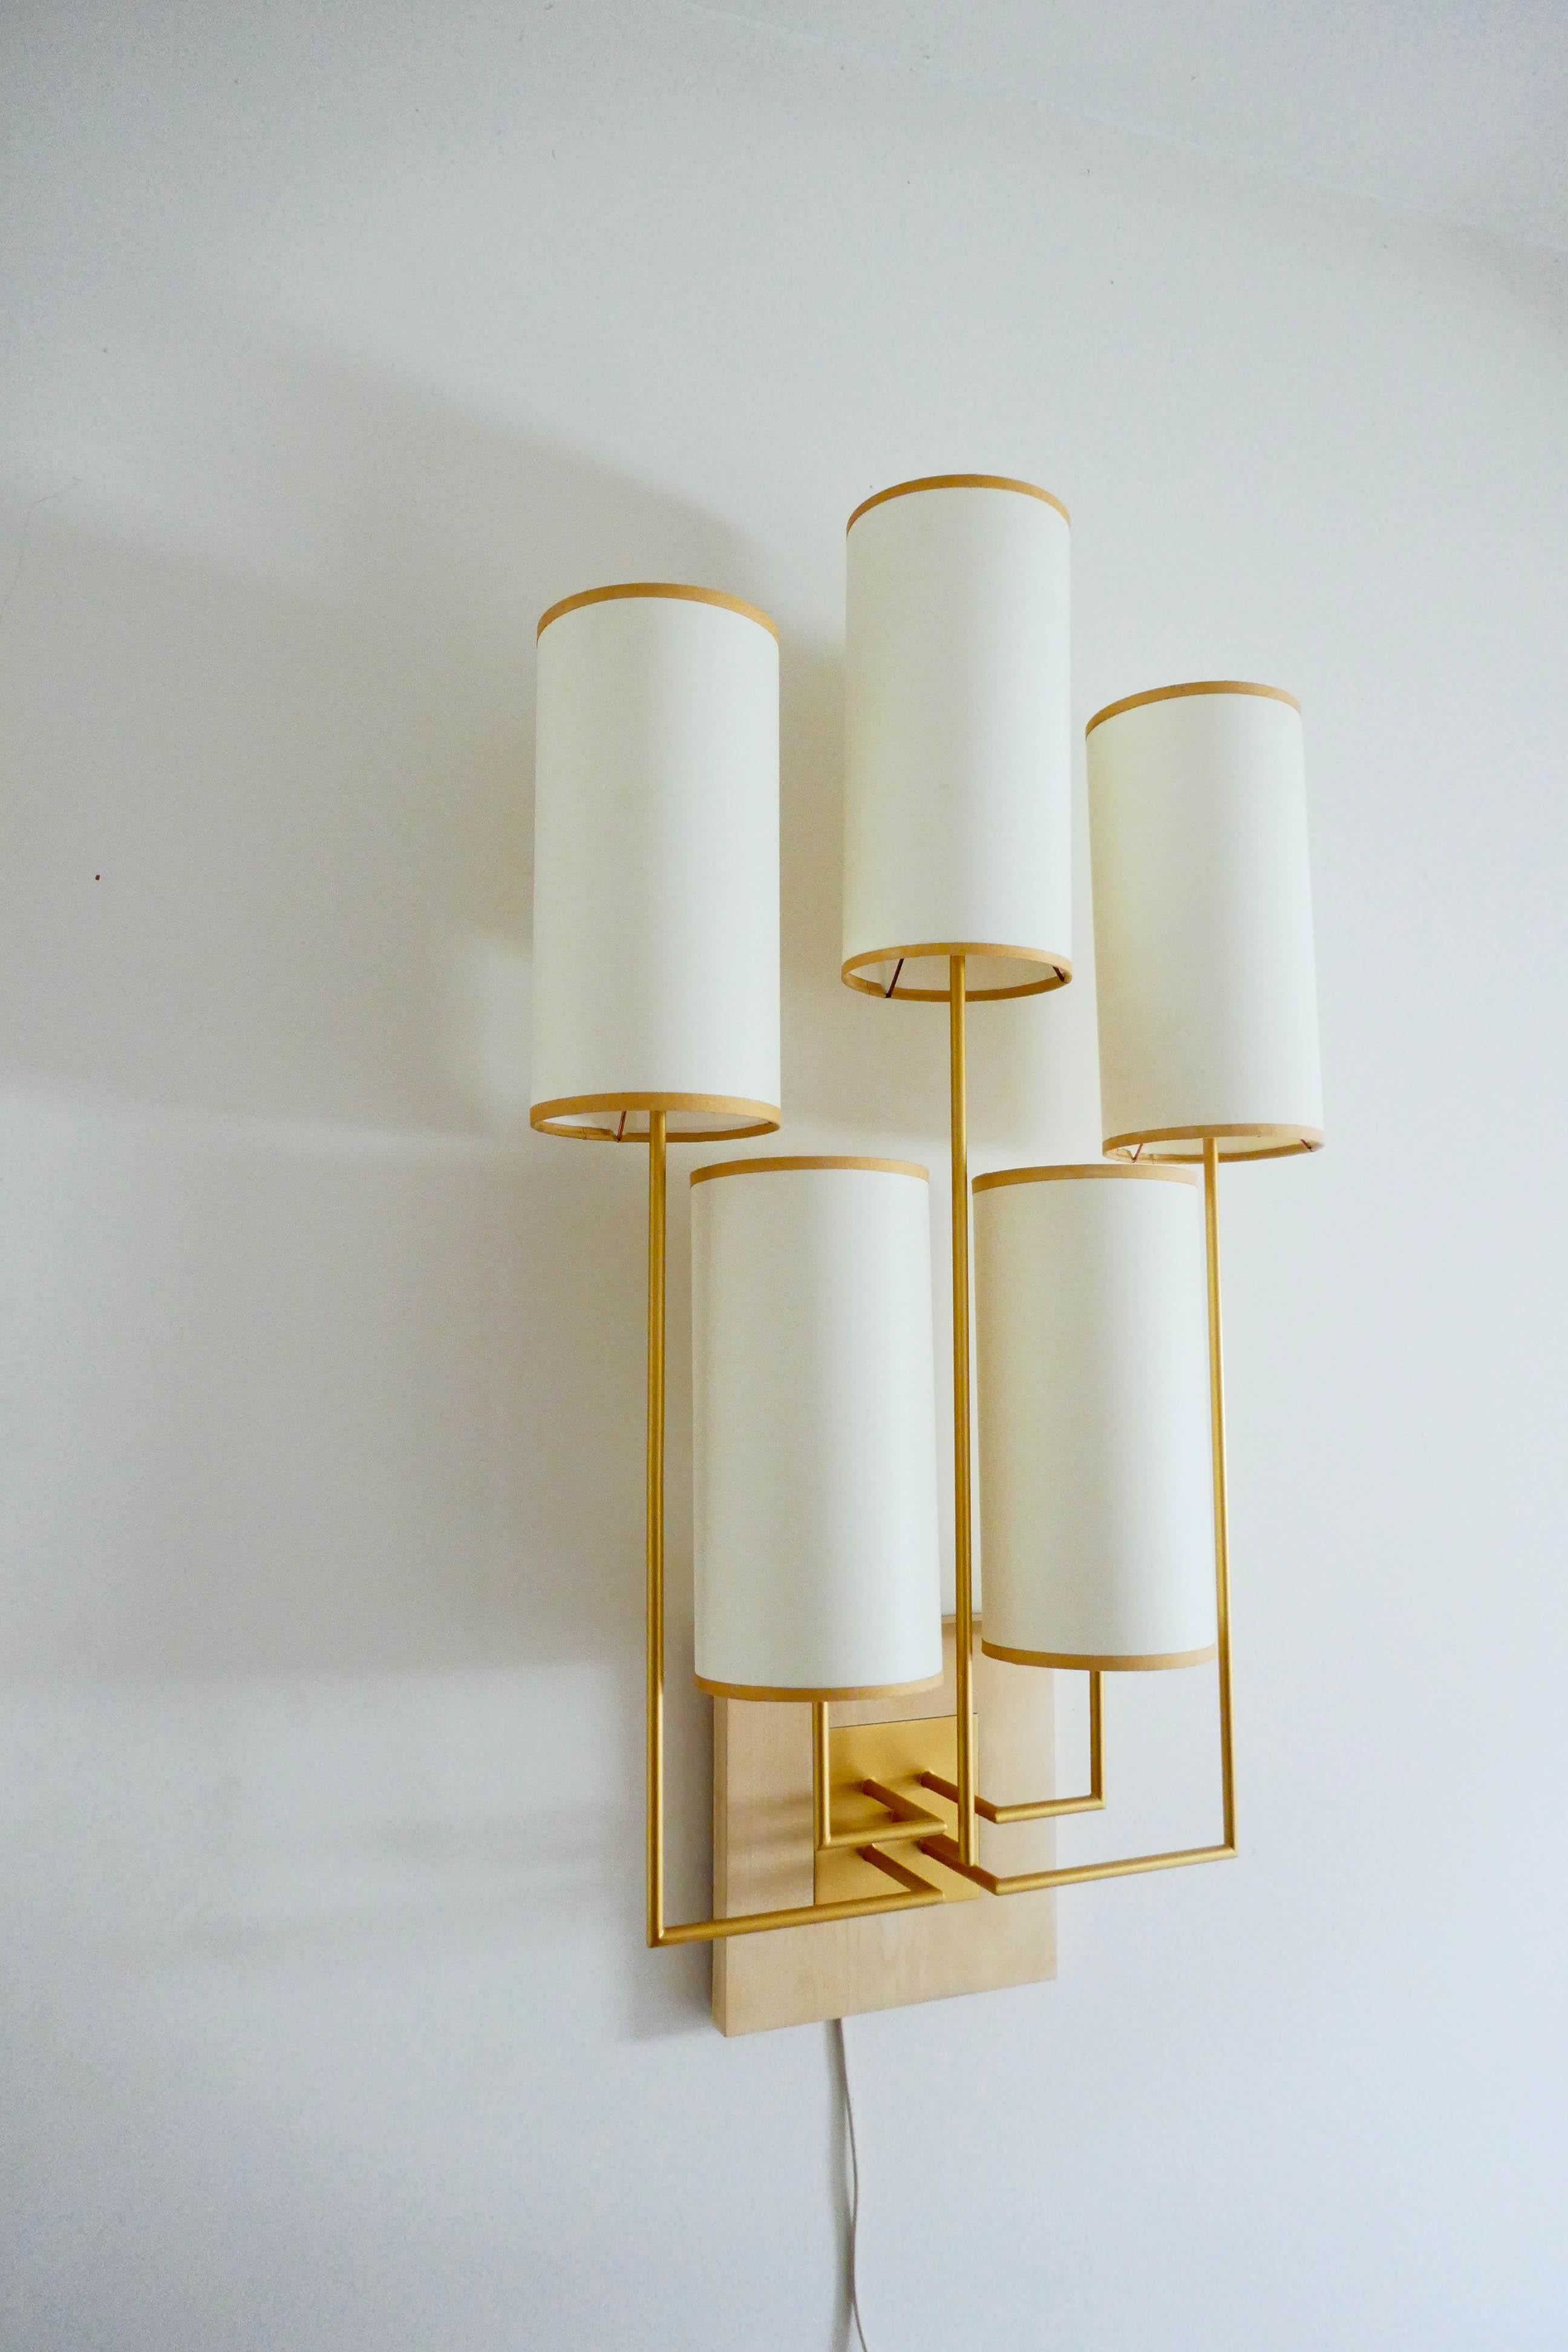 Pair of Wall Lamp Sconce in Gold Patina and White Fabric Lamp Shades For Sale 2